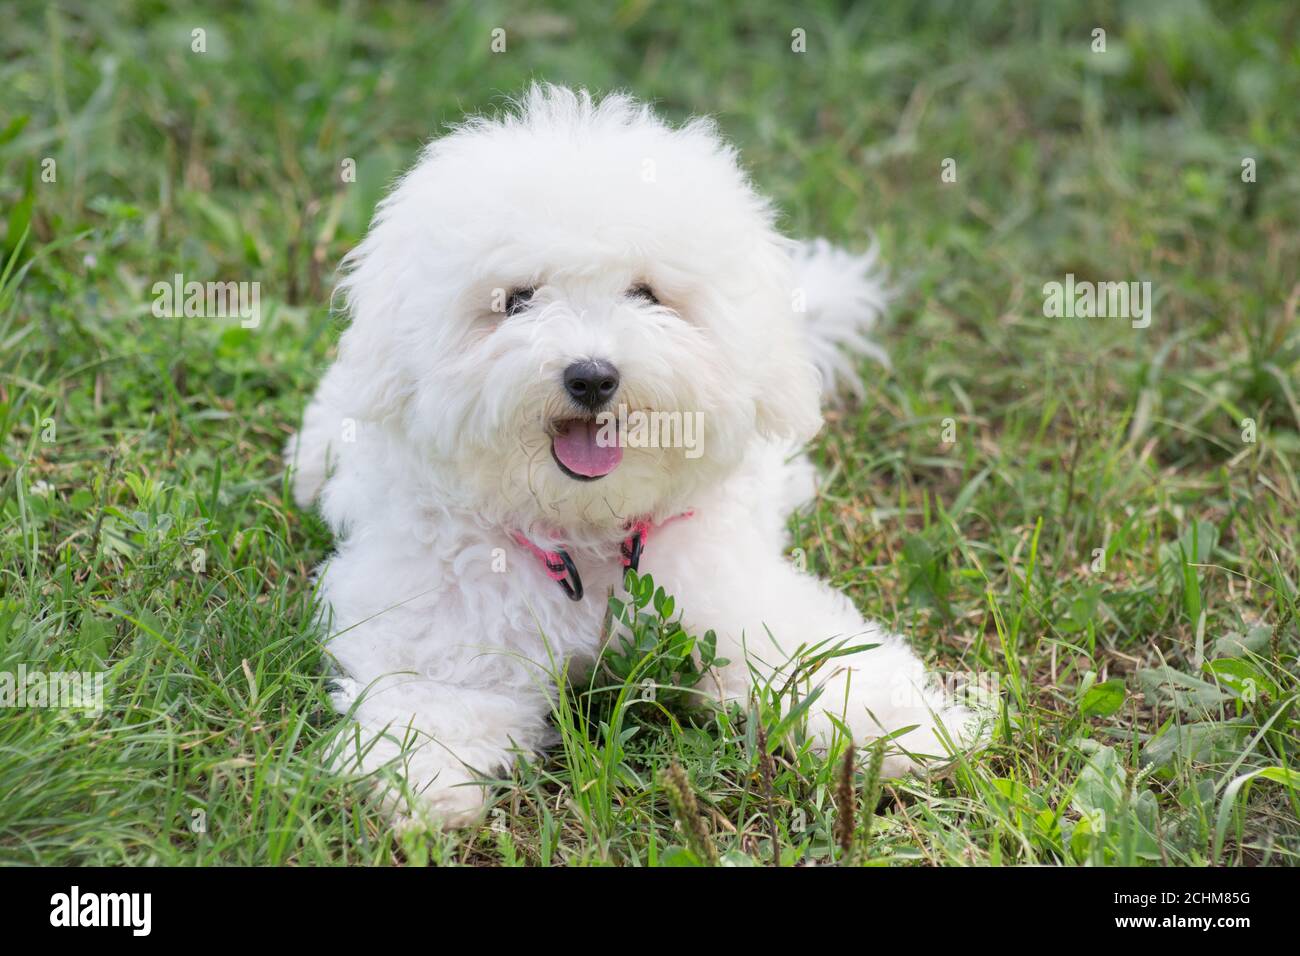 Cute bichon frise puppy is lying on a green grass in the summer park. Pet animals. Purebred dog. Stock Photo